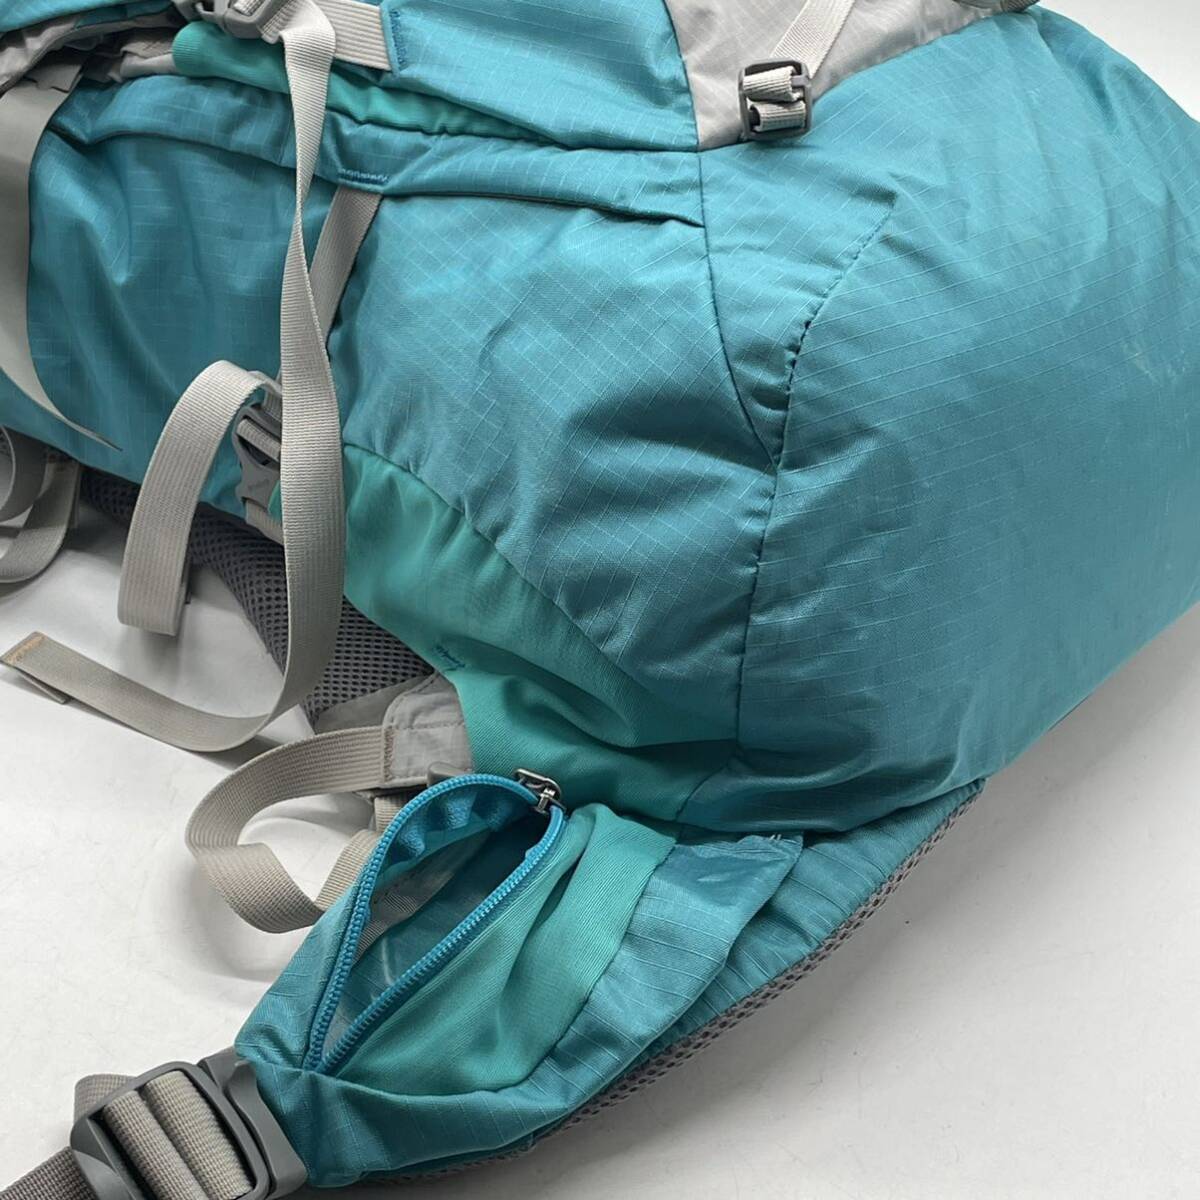 ⑫BN47* MONTBELL Mont Bell chacha pack 35 rucksack backpack green group × gray nylon rain cover attaching 